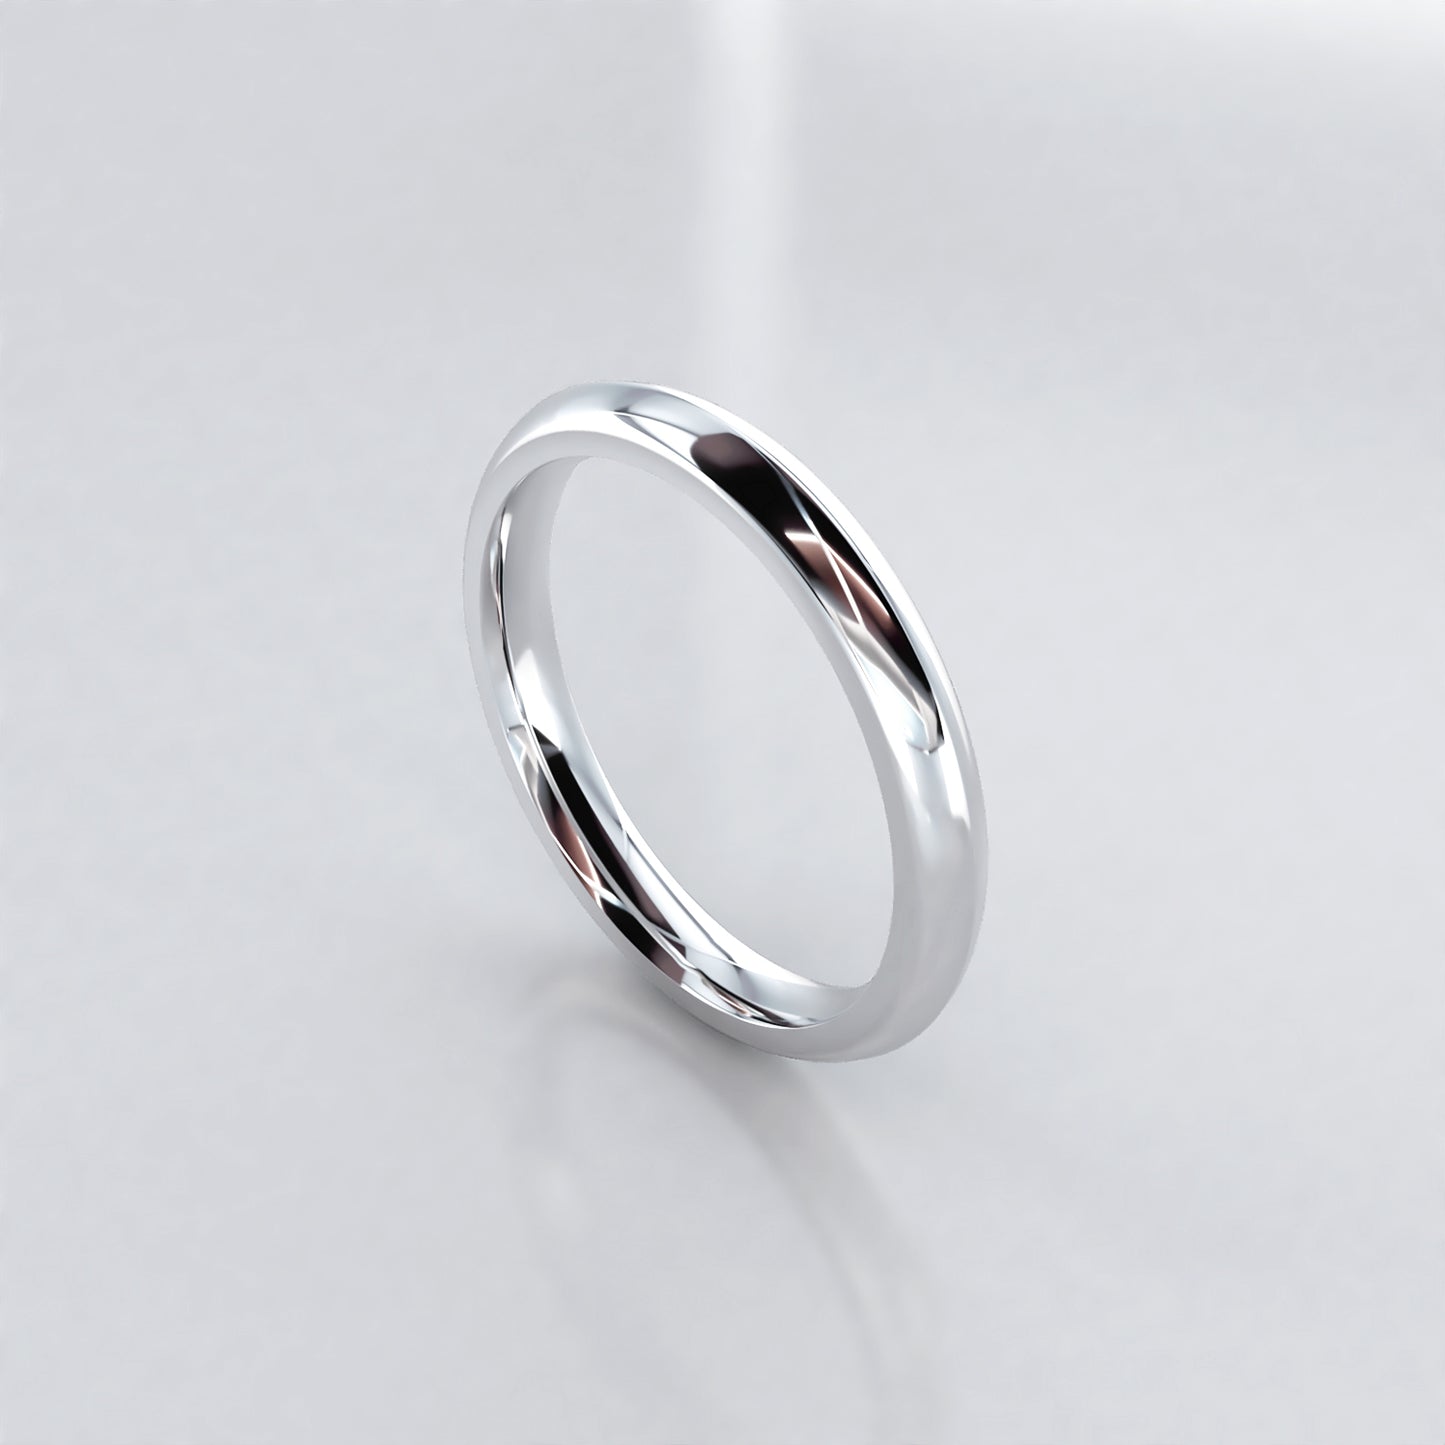 Ethereal: 18ct White Gold Fitted Wedding Band